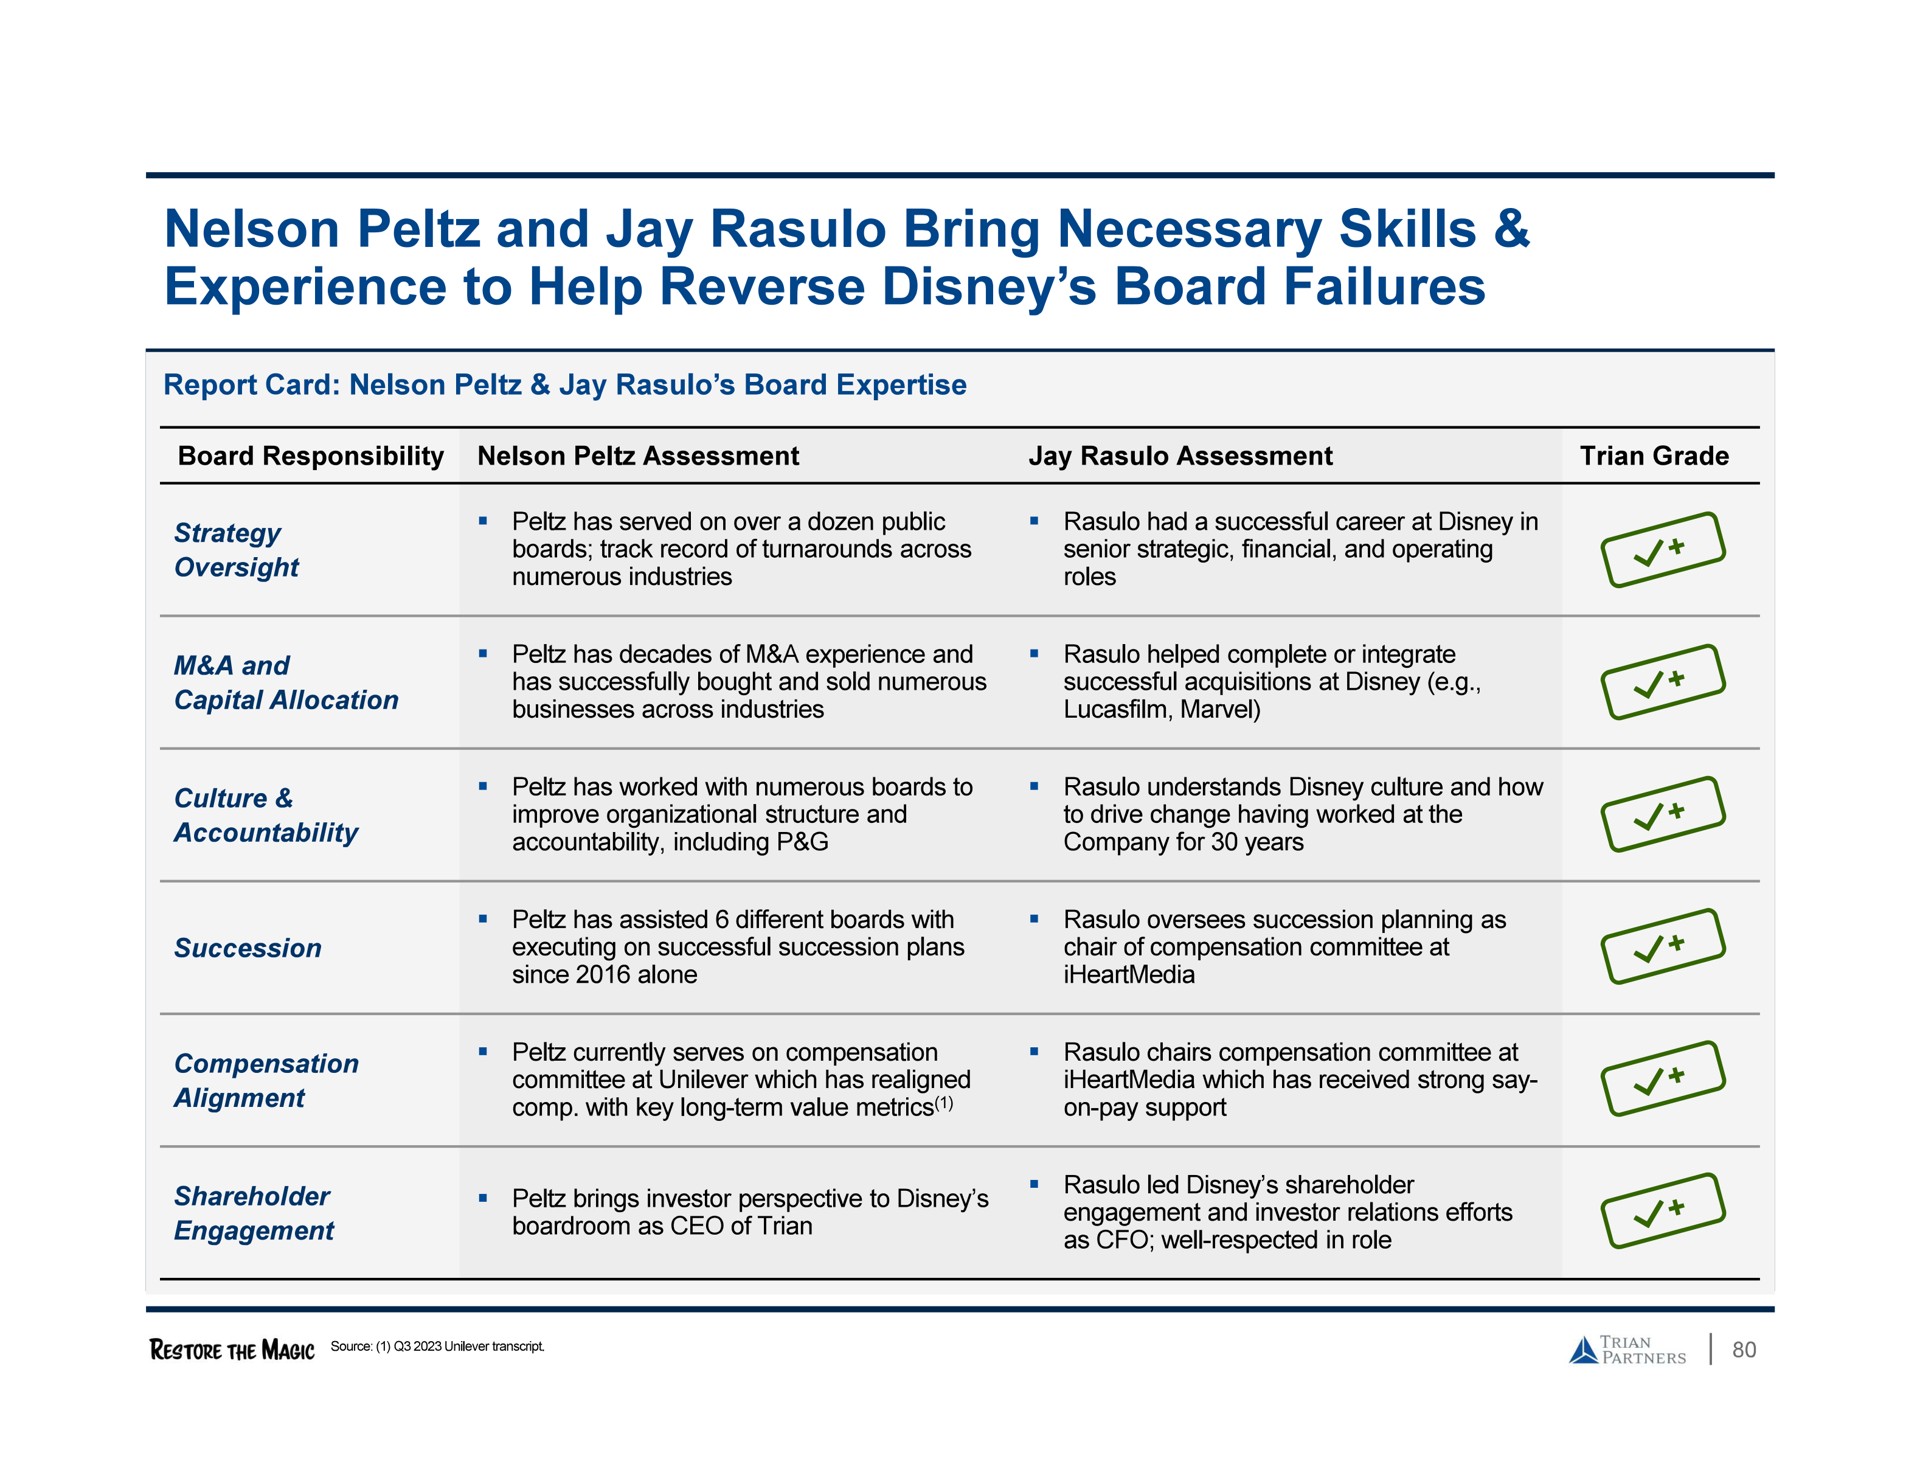 nelson and jay bring necessary skills experience to help reverse board failures a | Trian Partners